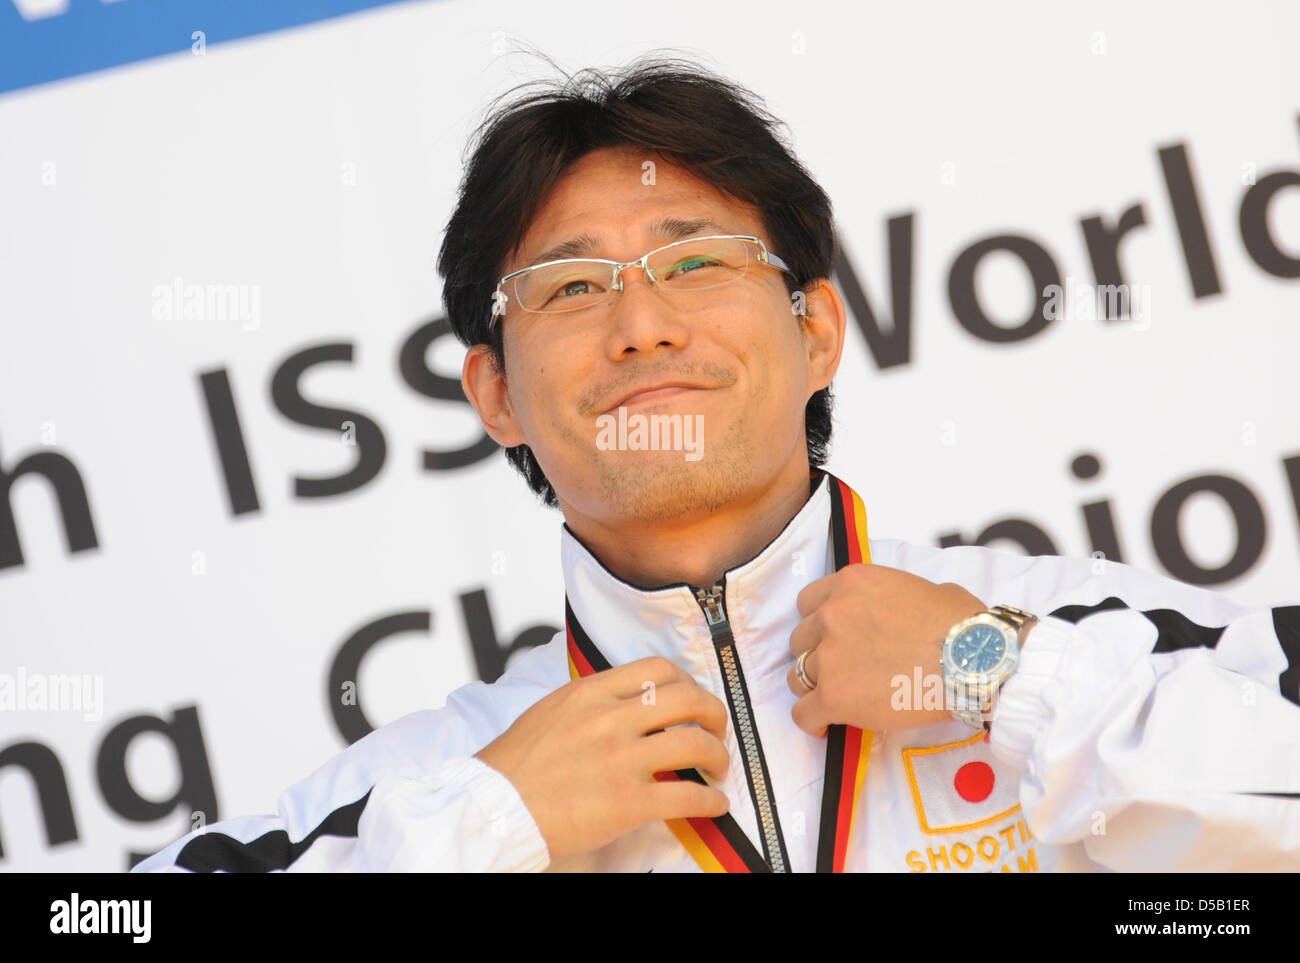 The Japanese shooting competitor Tomoyuki Matsuda celebrates his victory in the category 50 metre pistol during the ISSF Shooting World Cup in Garching nearby Munich, Germany, 1 August 2010. Photo: ANDREAS GEBERT Stock Photo